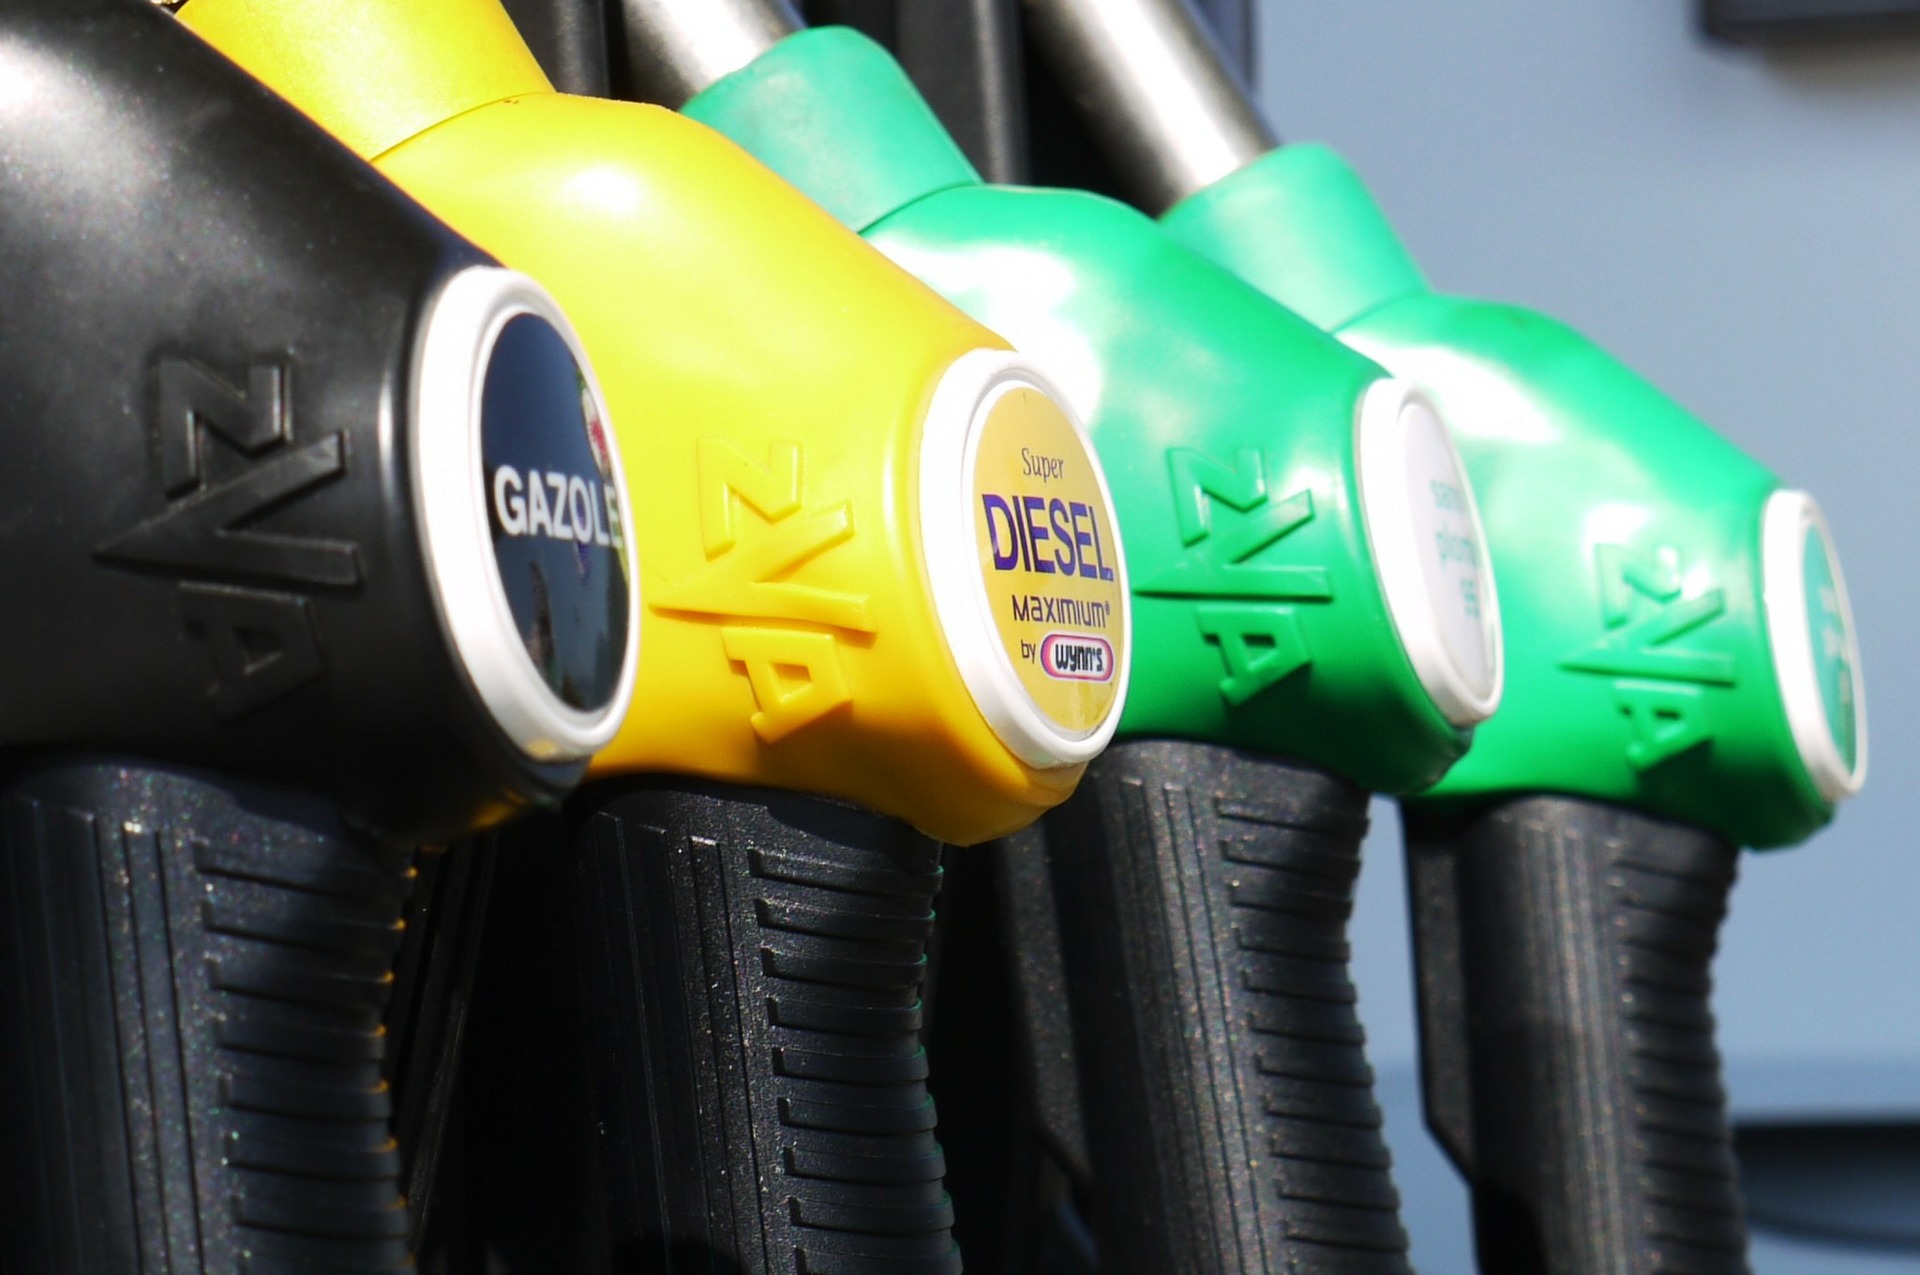 Nozzles at a filling station with different types of fuel